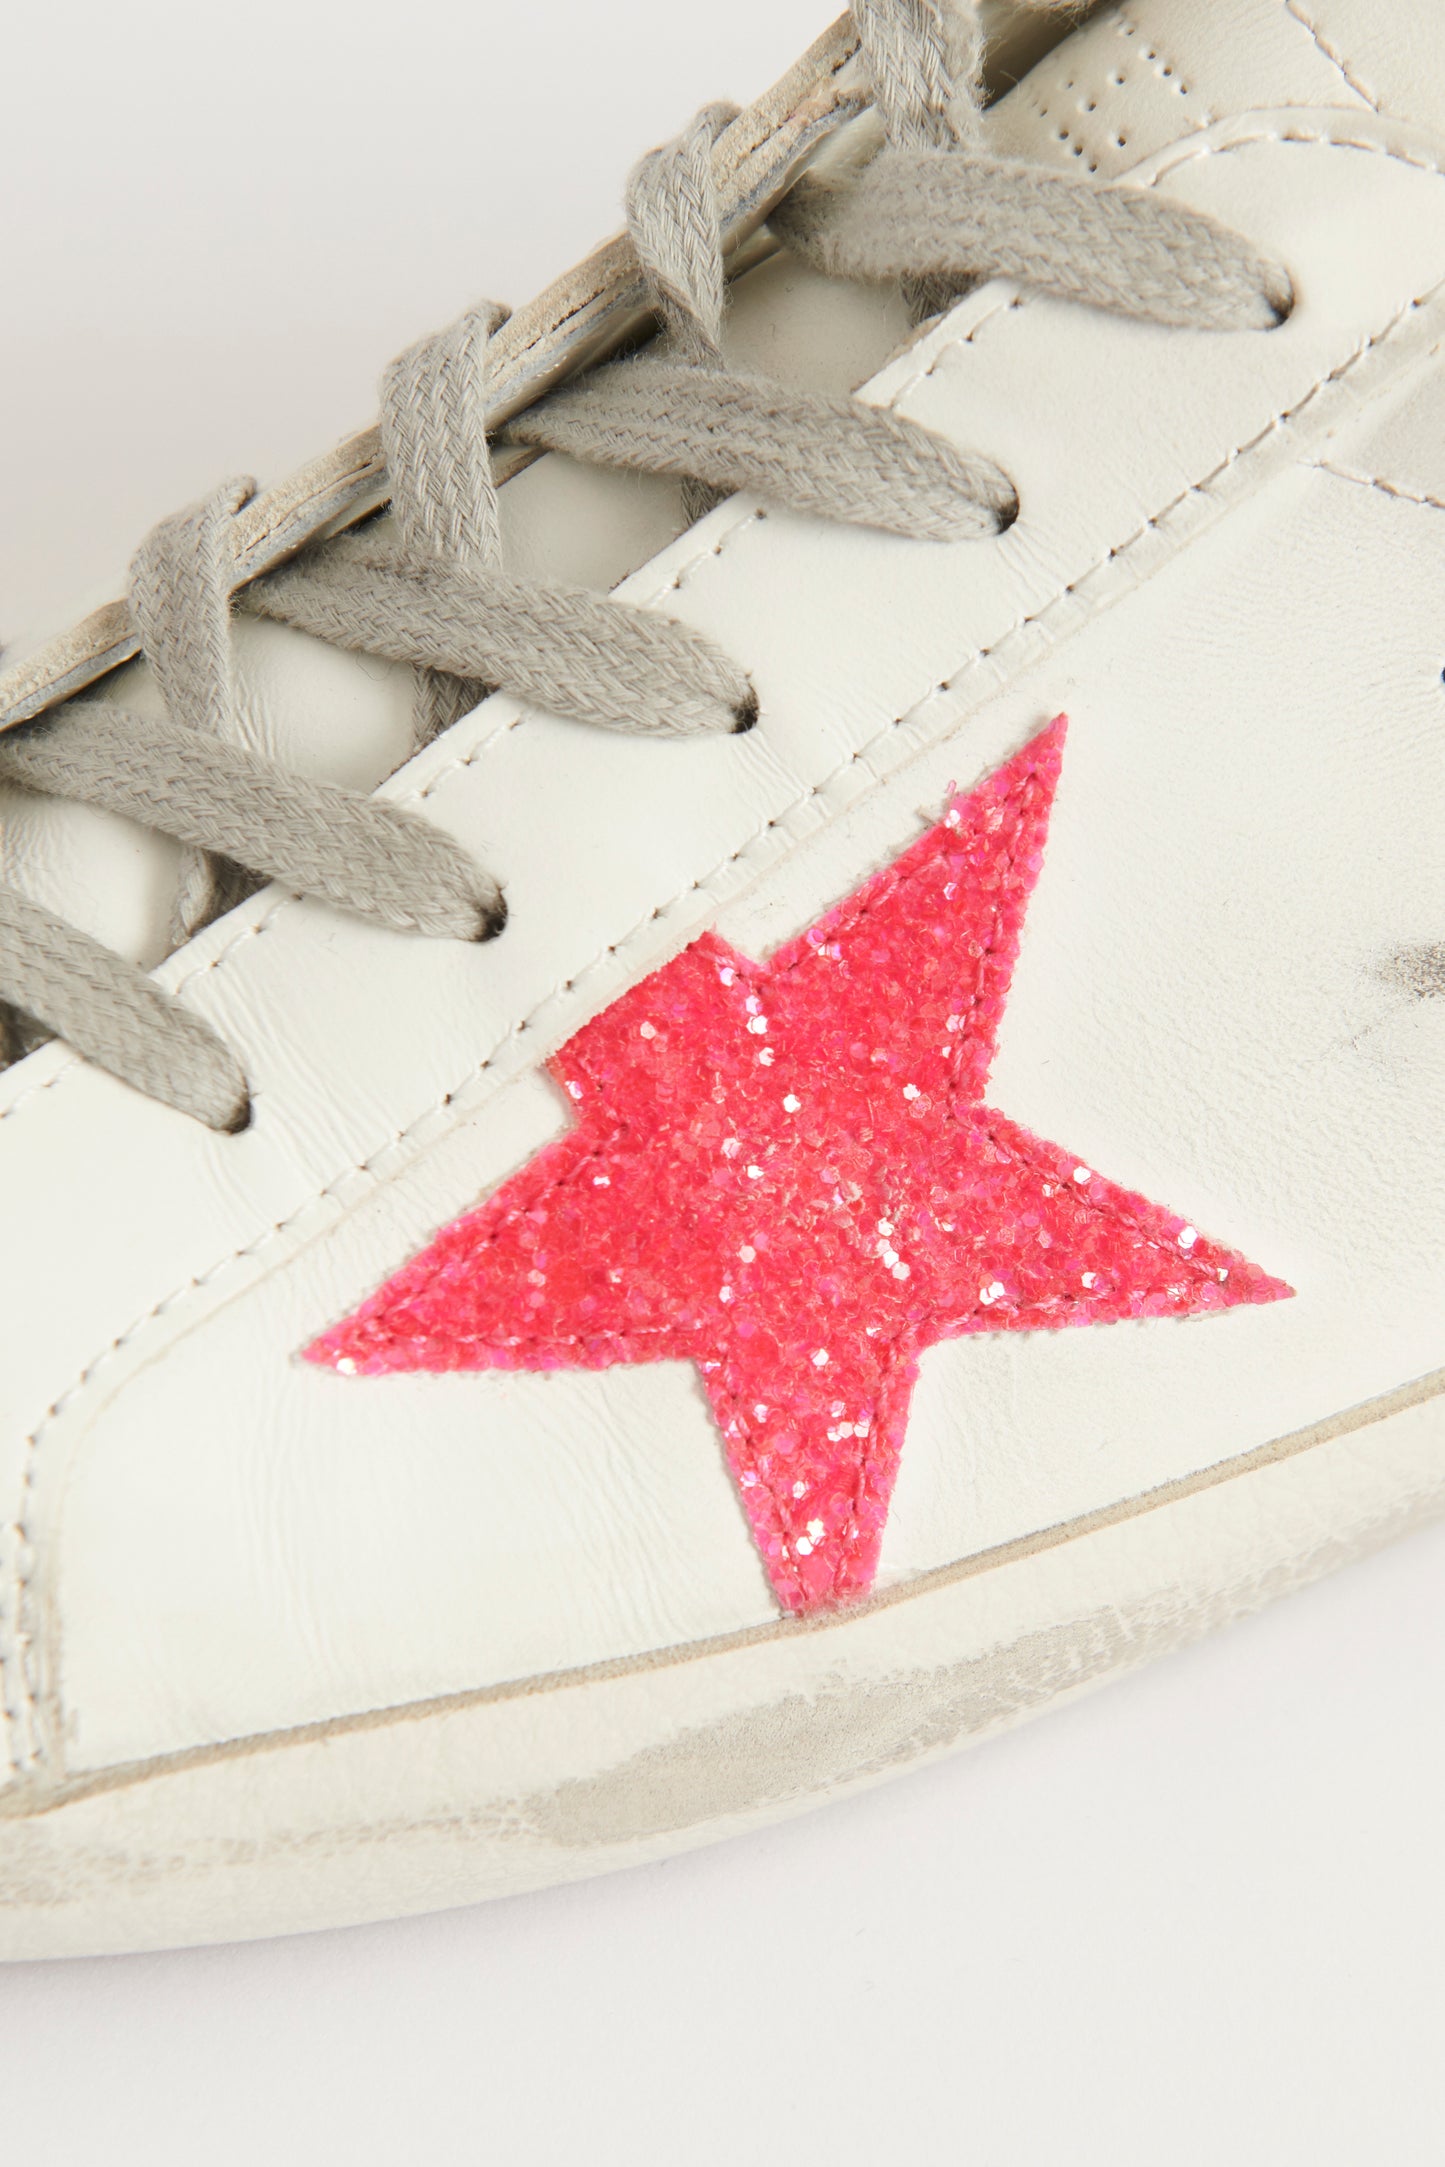 White Leather Preowned Superstar Sabot Trainers